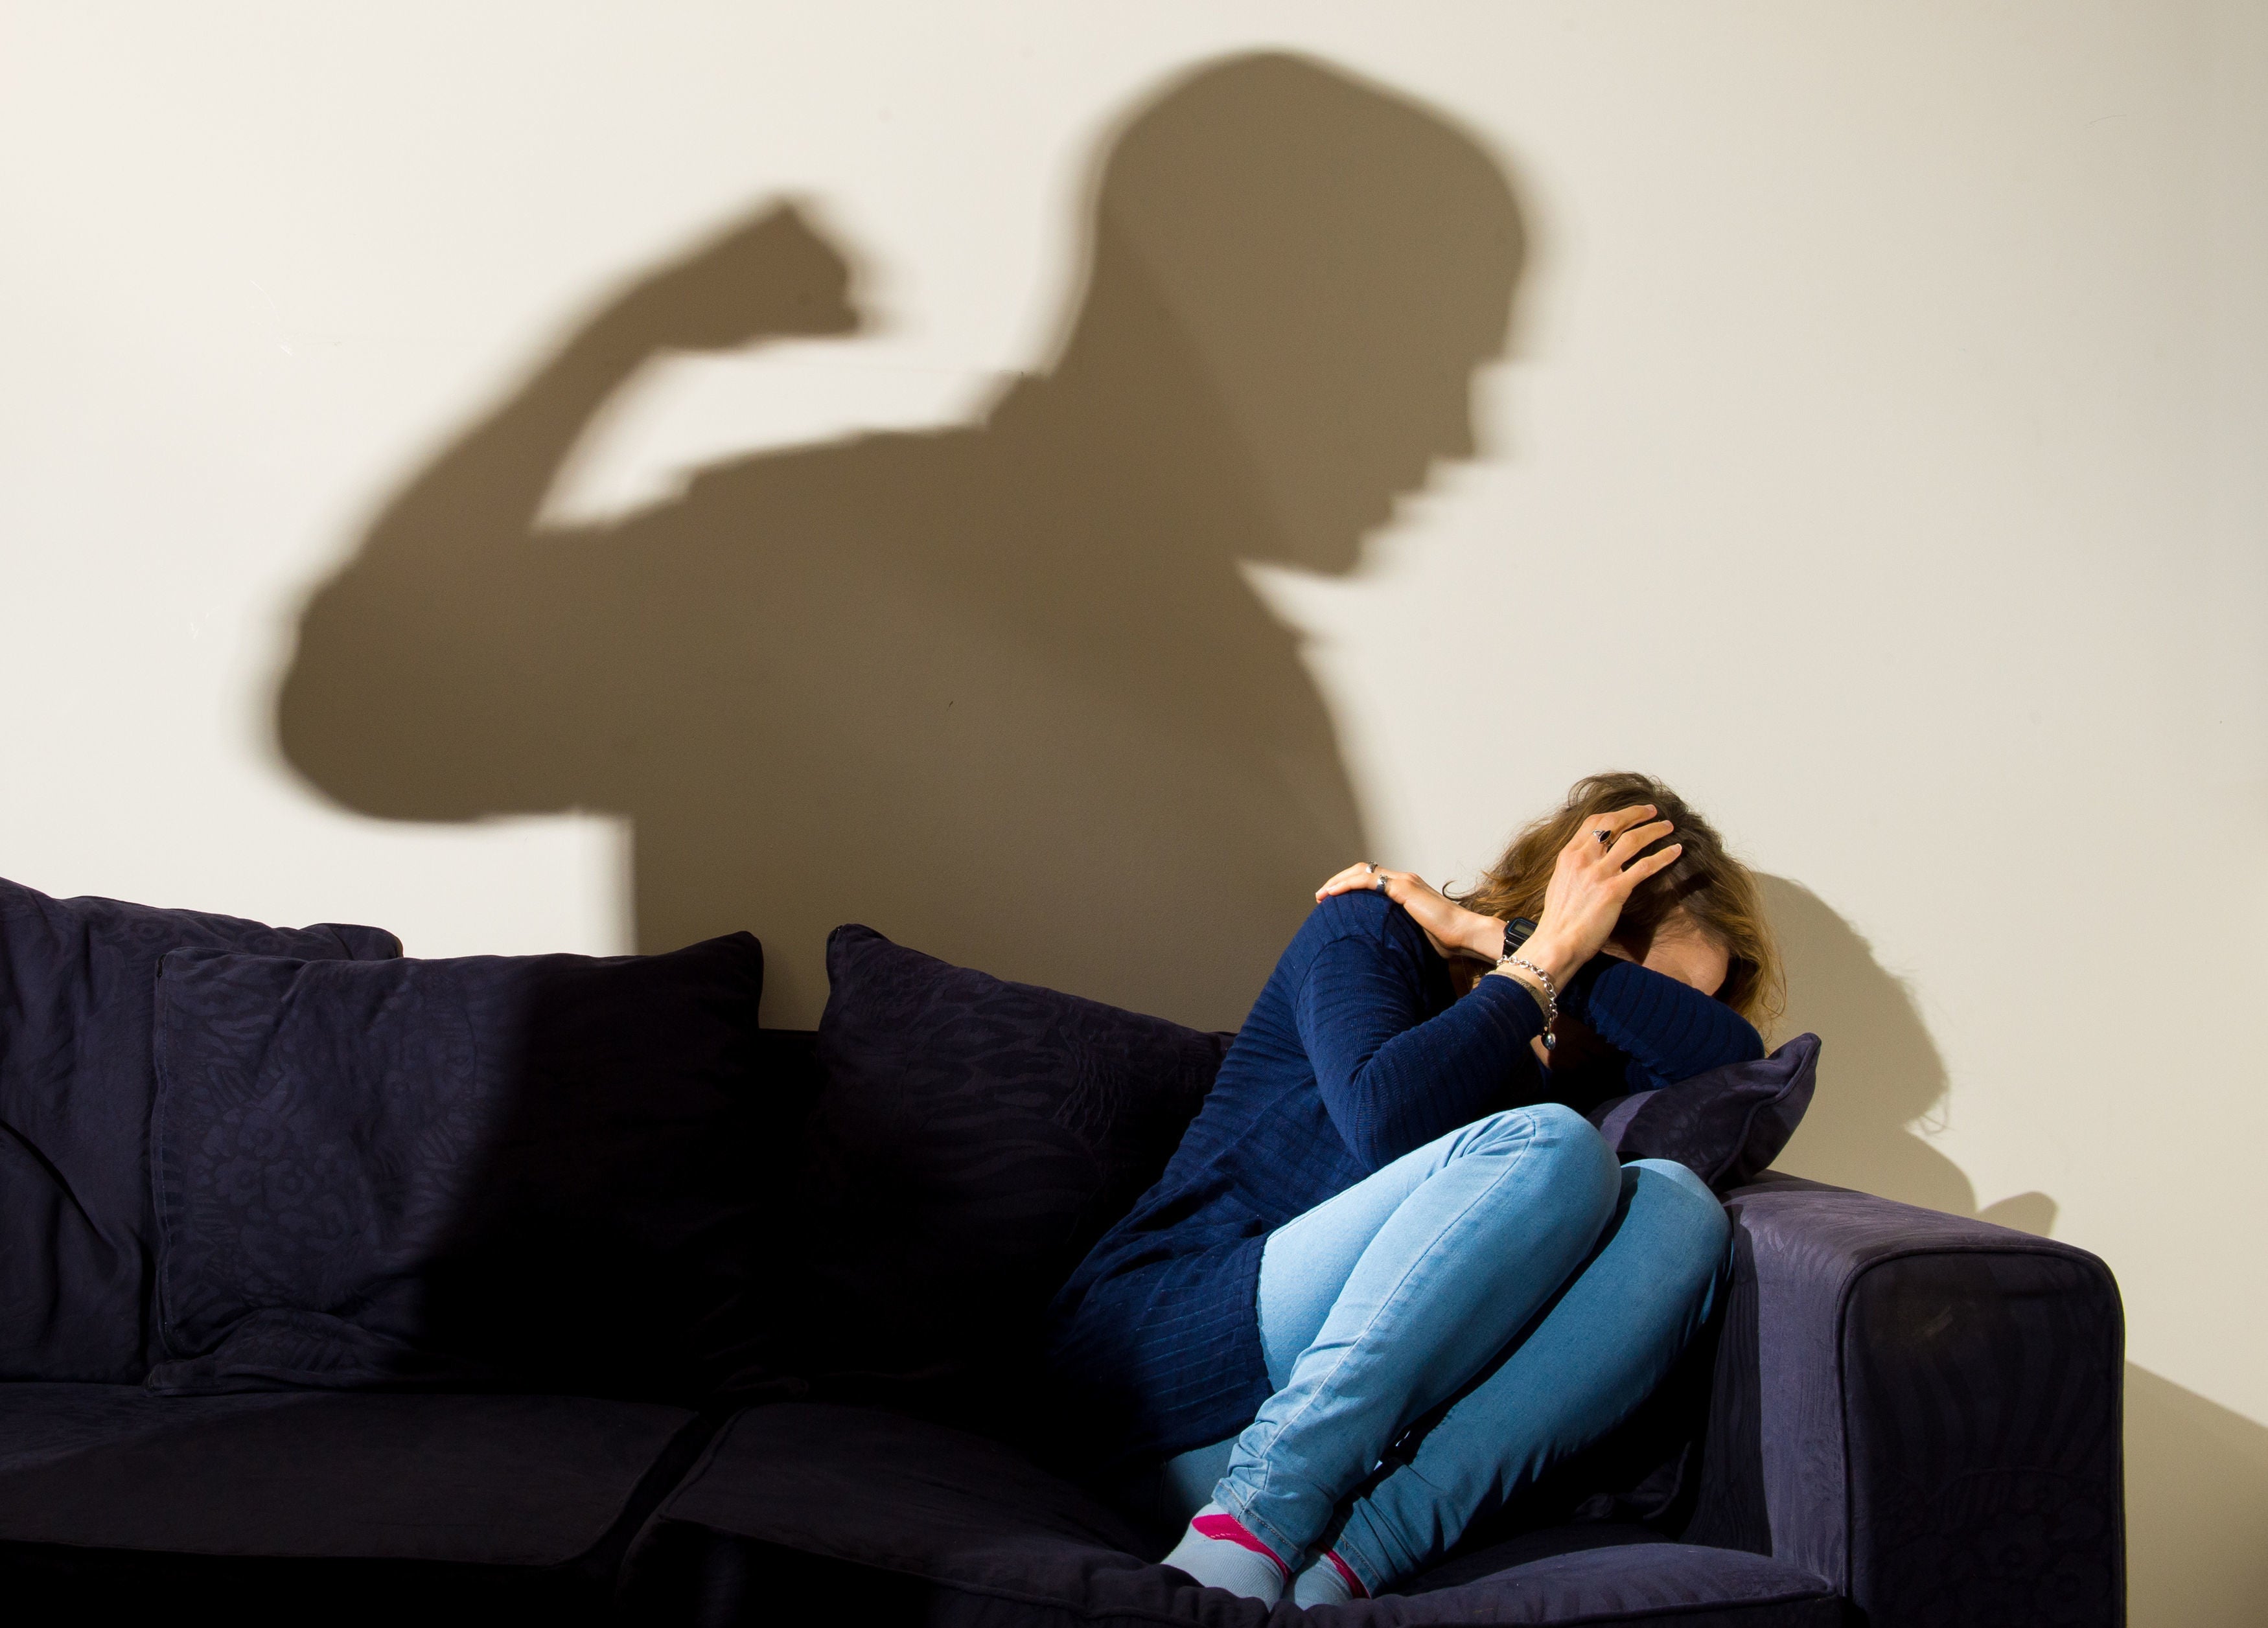 The project surveyed 107 survivors of domestic abuse across the country